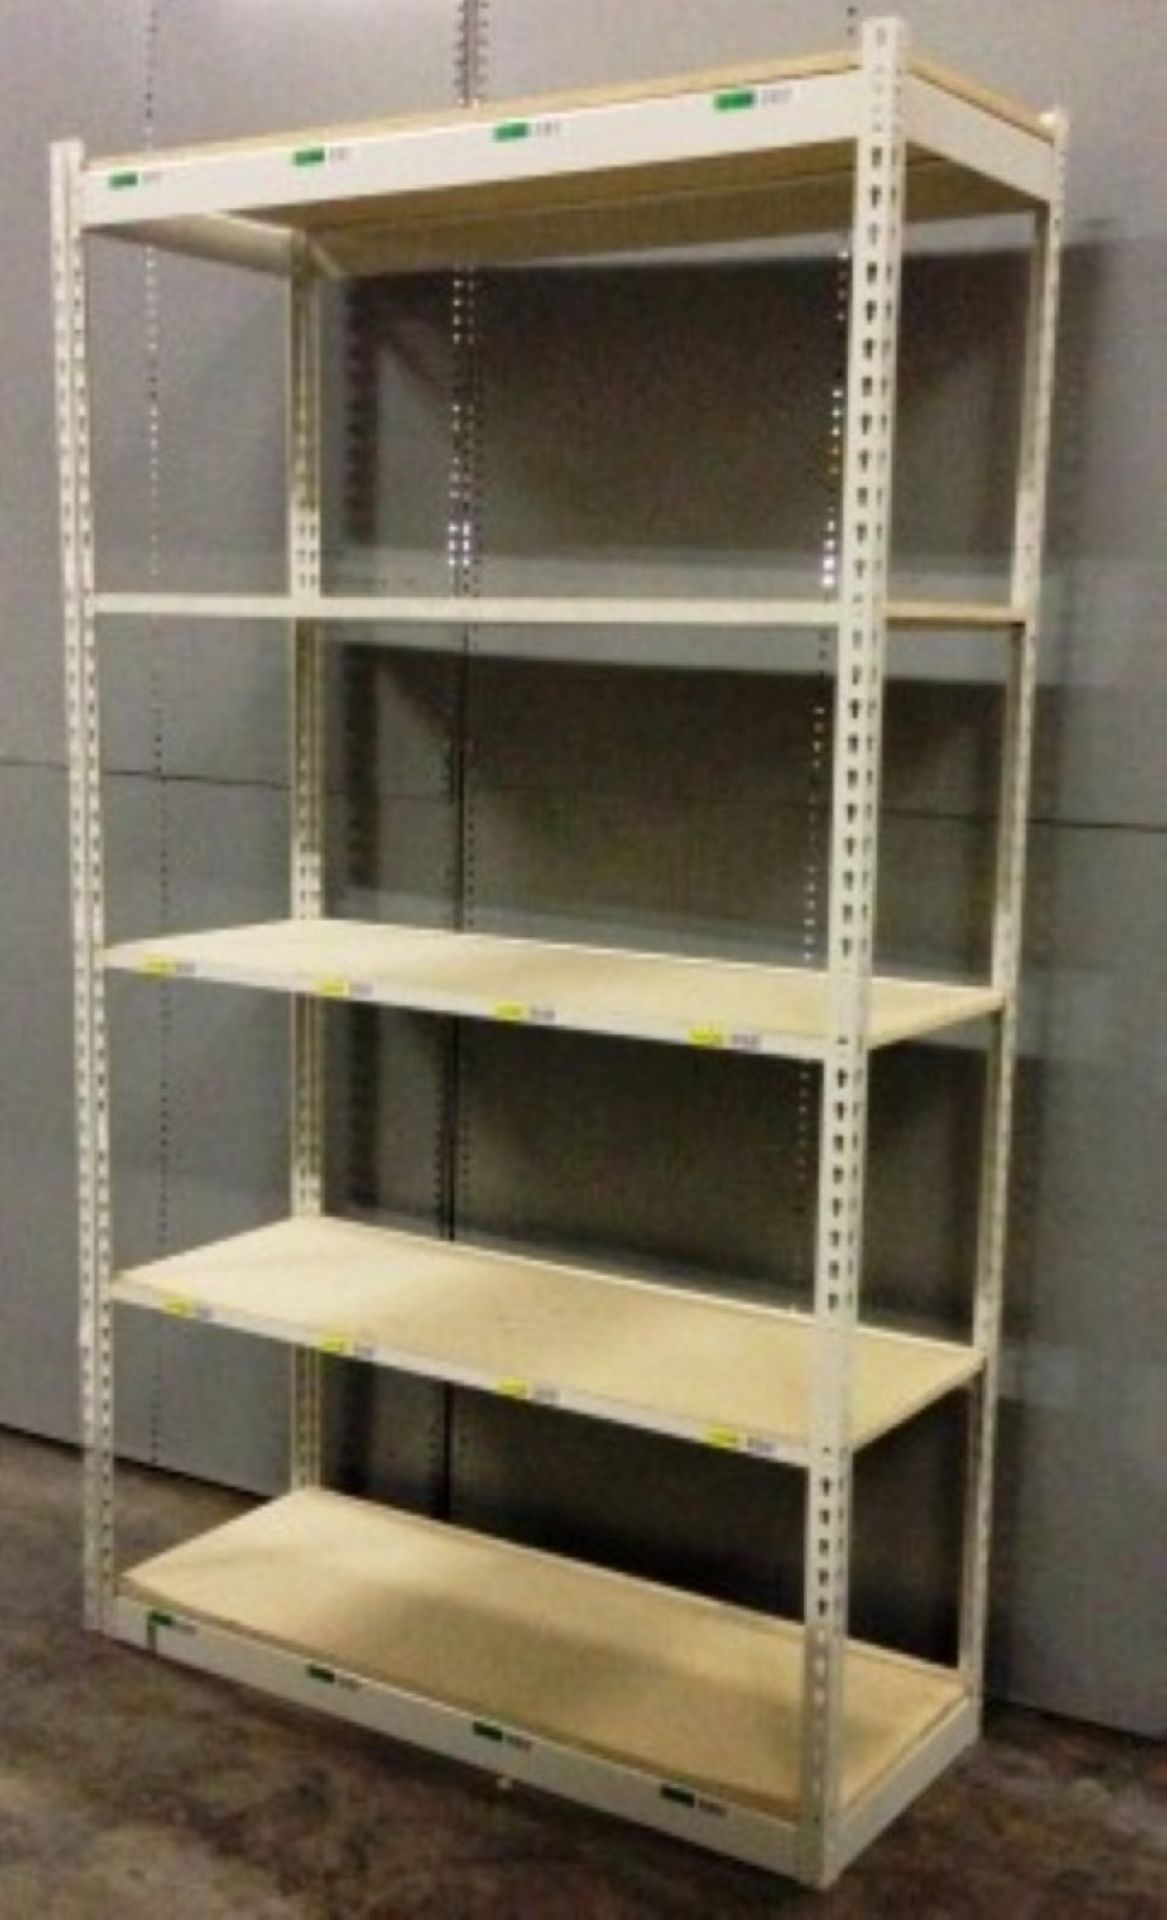 ONE LOT OF 30 SECTIONS OF RIVETIER INDUSTRIAL SHELVING, - Image 3 of 3